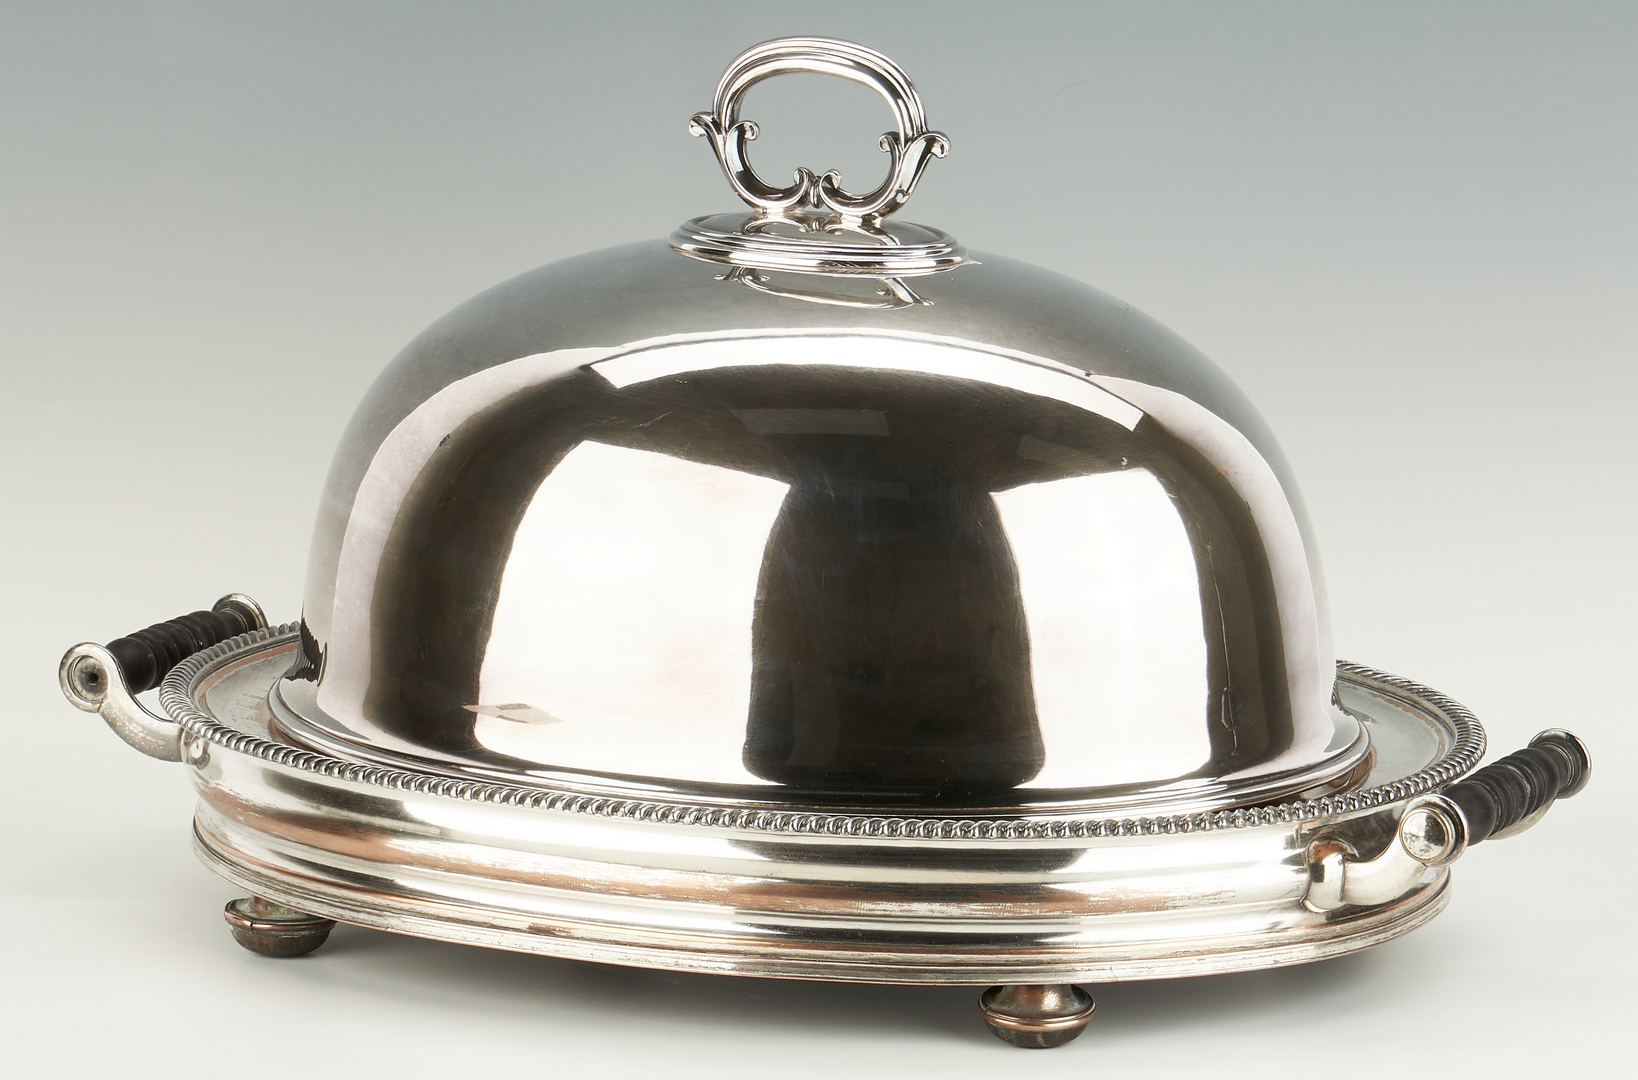 Lot 947: Old Sheffield Plate Warming Stand and Meat Dome